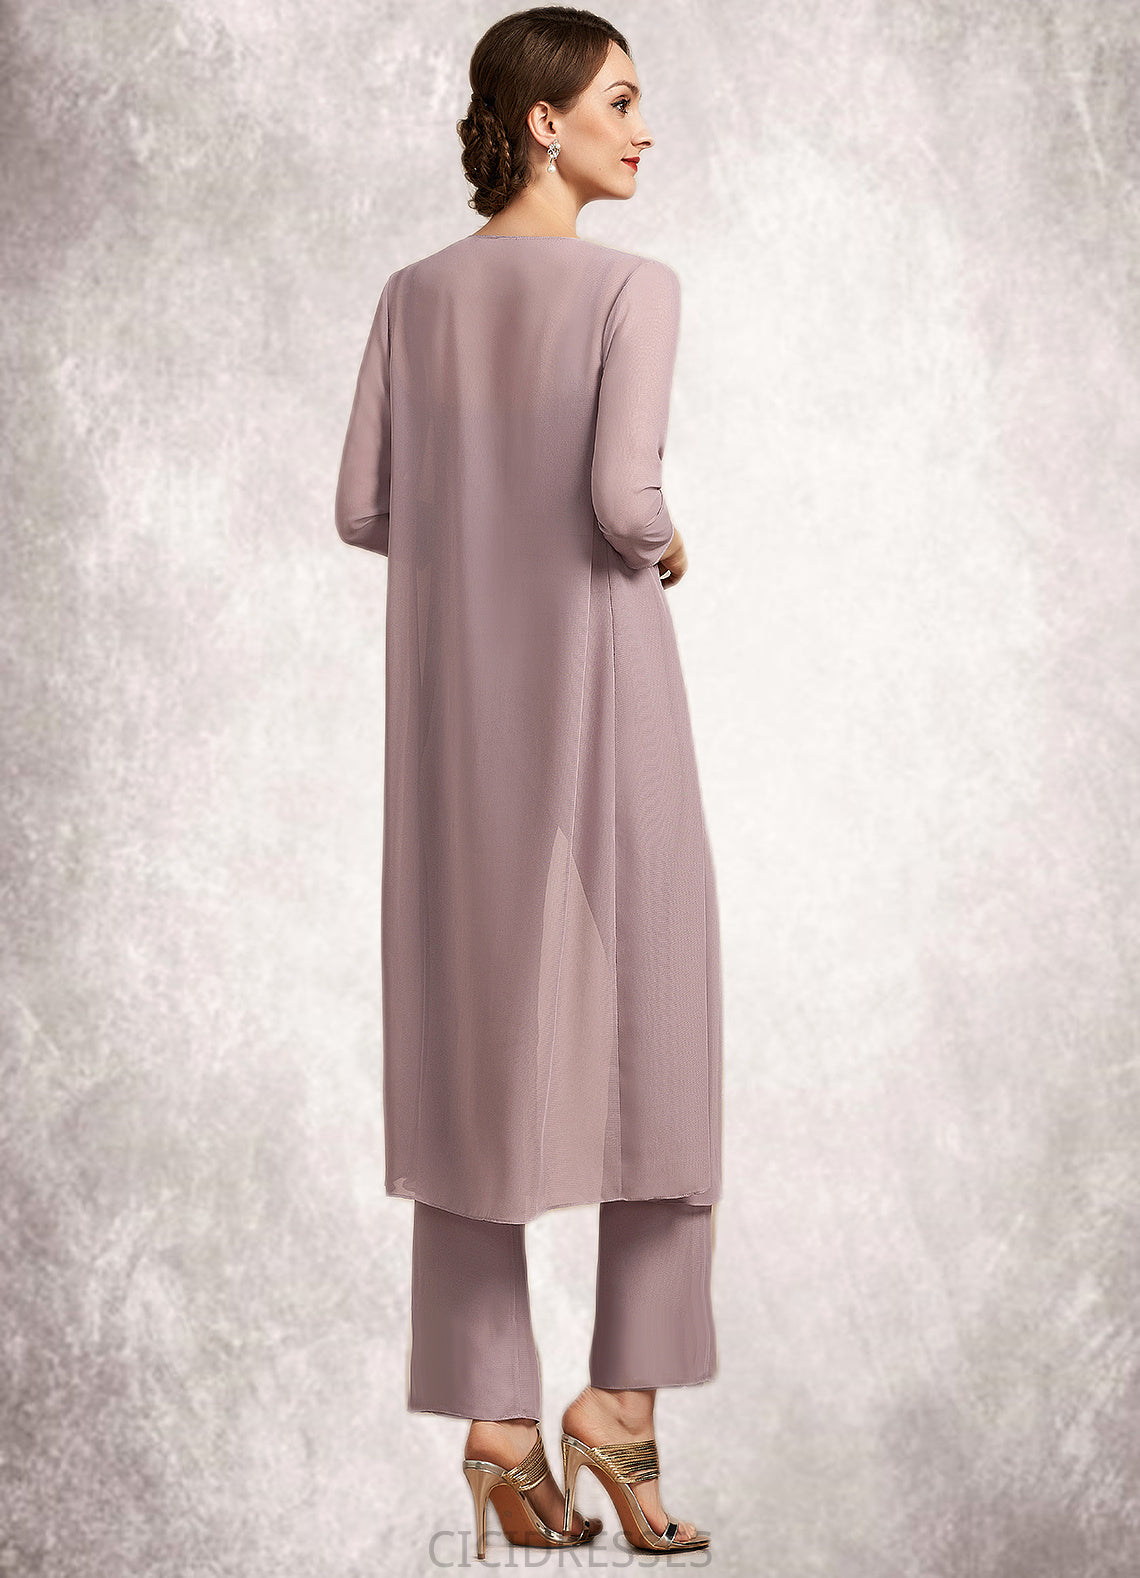 Danica Jumpsuit/Pantsuit Square Neckline Ankle-Length Chiffon Mother of the Bride Dress With Ruffle CIC8126P0014984